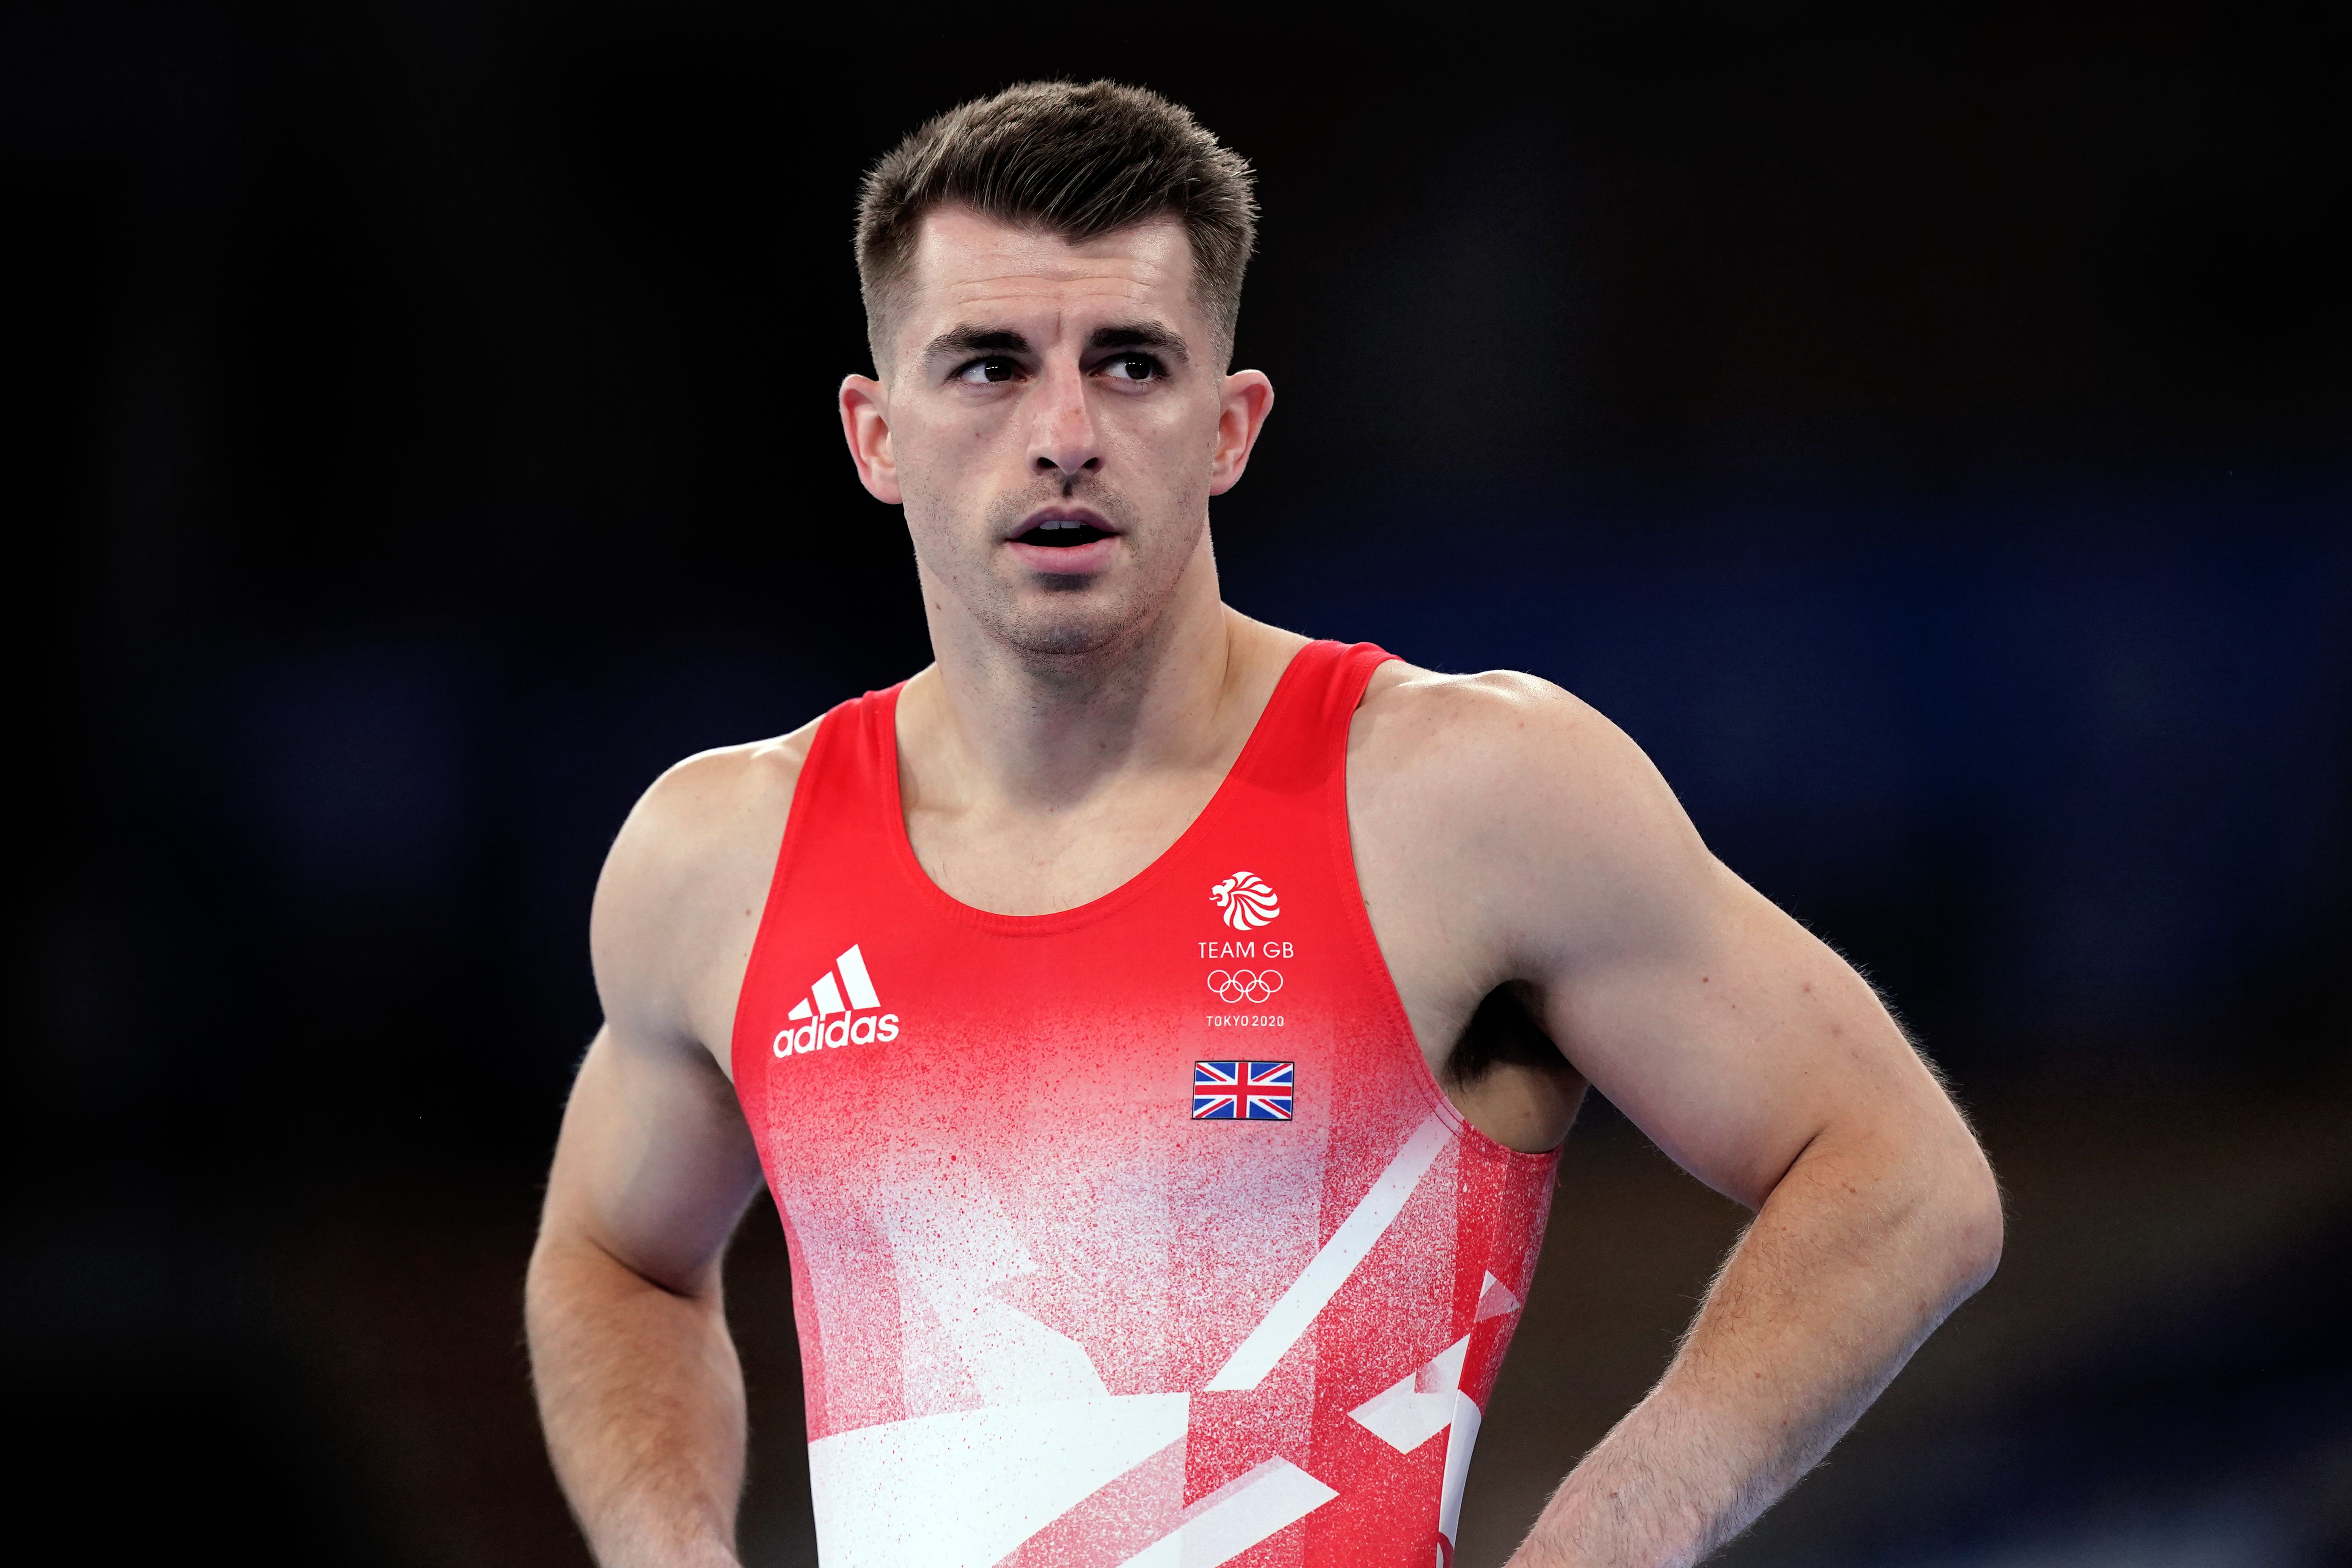 Max Whitlock made his first global outing since the delayed Tokyo Olympics in 2021 at the World Championships in Antwerp